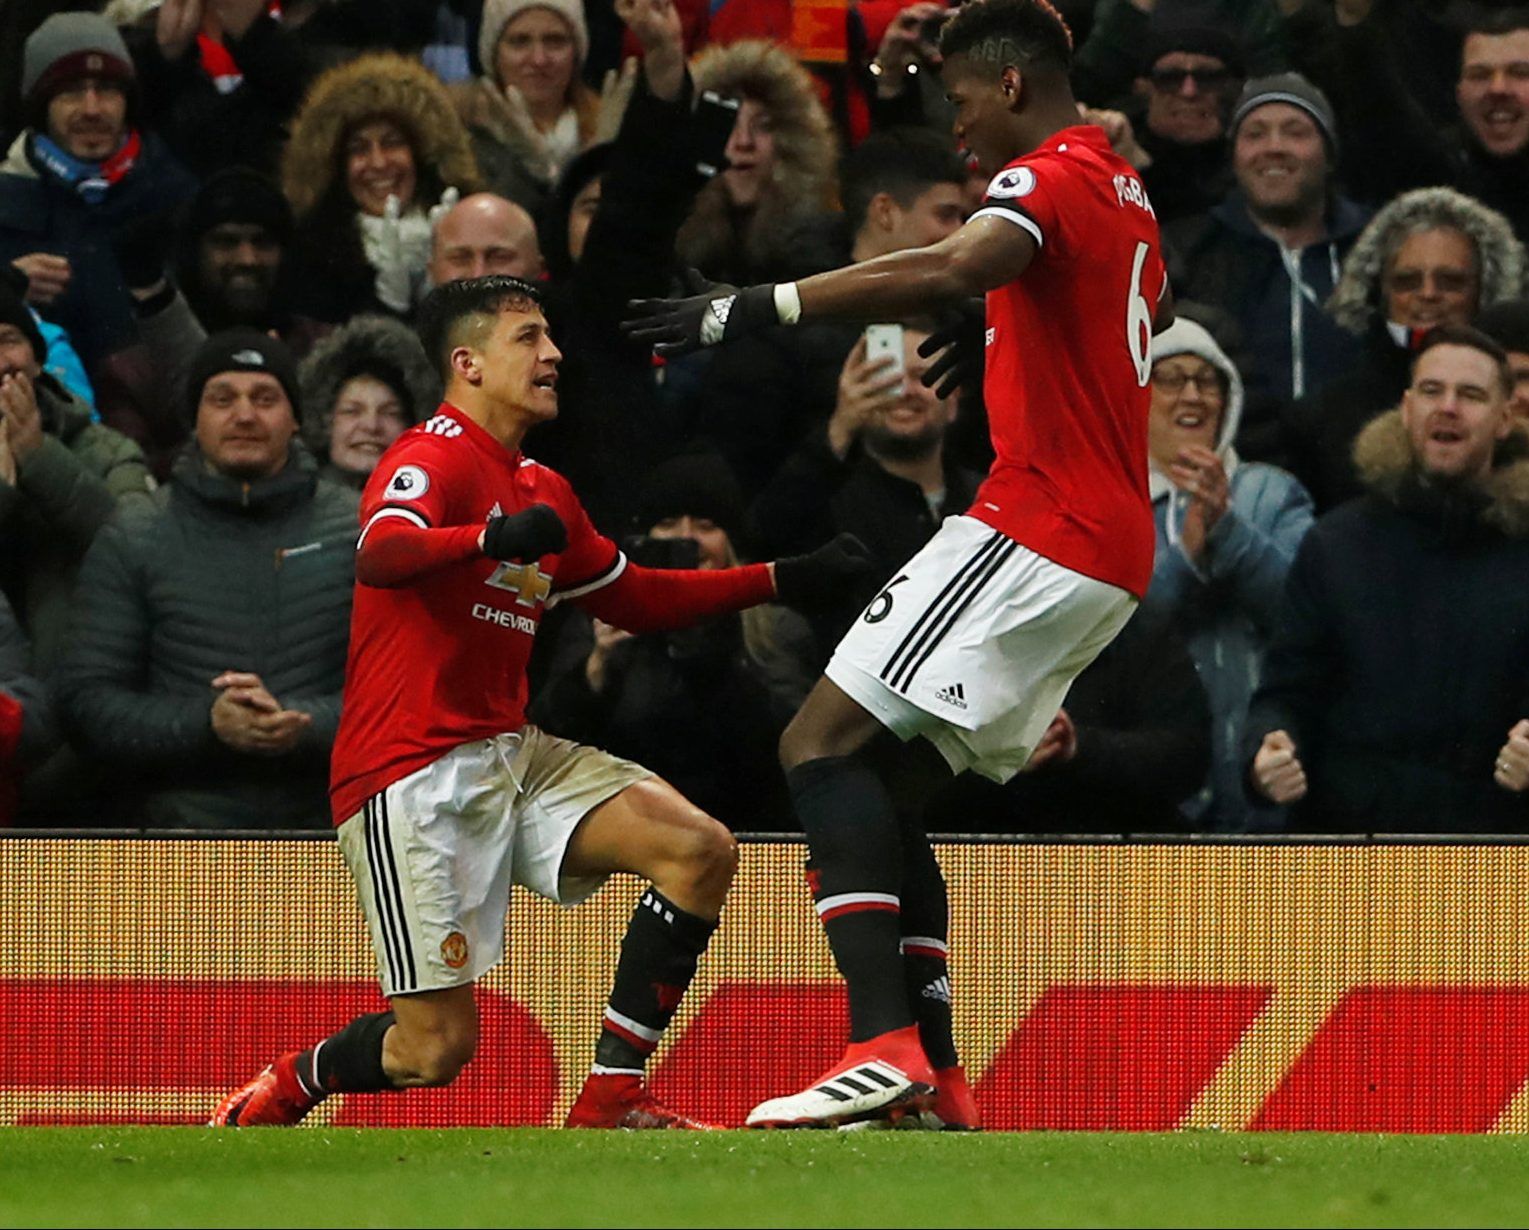 Soccer Football - Premier League - Manchester United vs Huddersfield Town - Old Trafford, Manchester, Britain - February 3, 2018   Manchester United’s Alexis Sanchez celebrates scoring their second goal with Paul Pogba    Action Images via Reuters/Lee Smith    EDITORIAL USE ONLY. No use with unauthorized audio, video, data, fixture lists, club/league logos or 